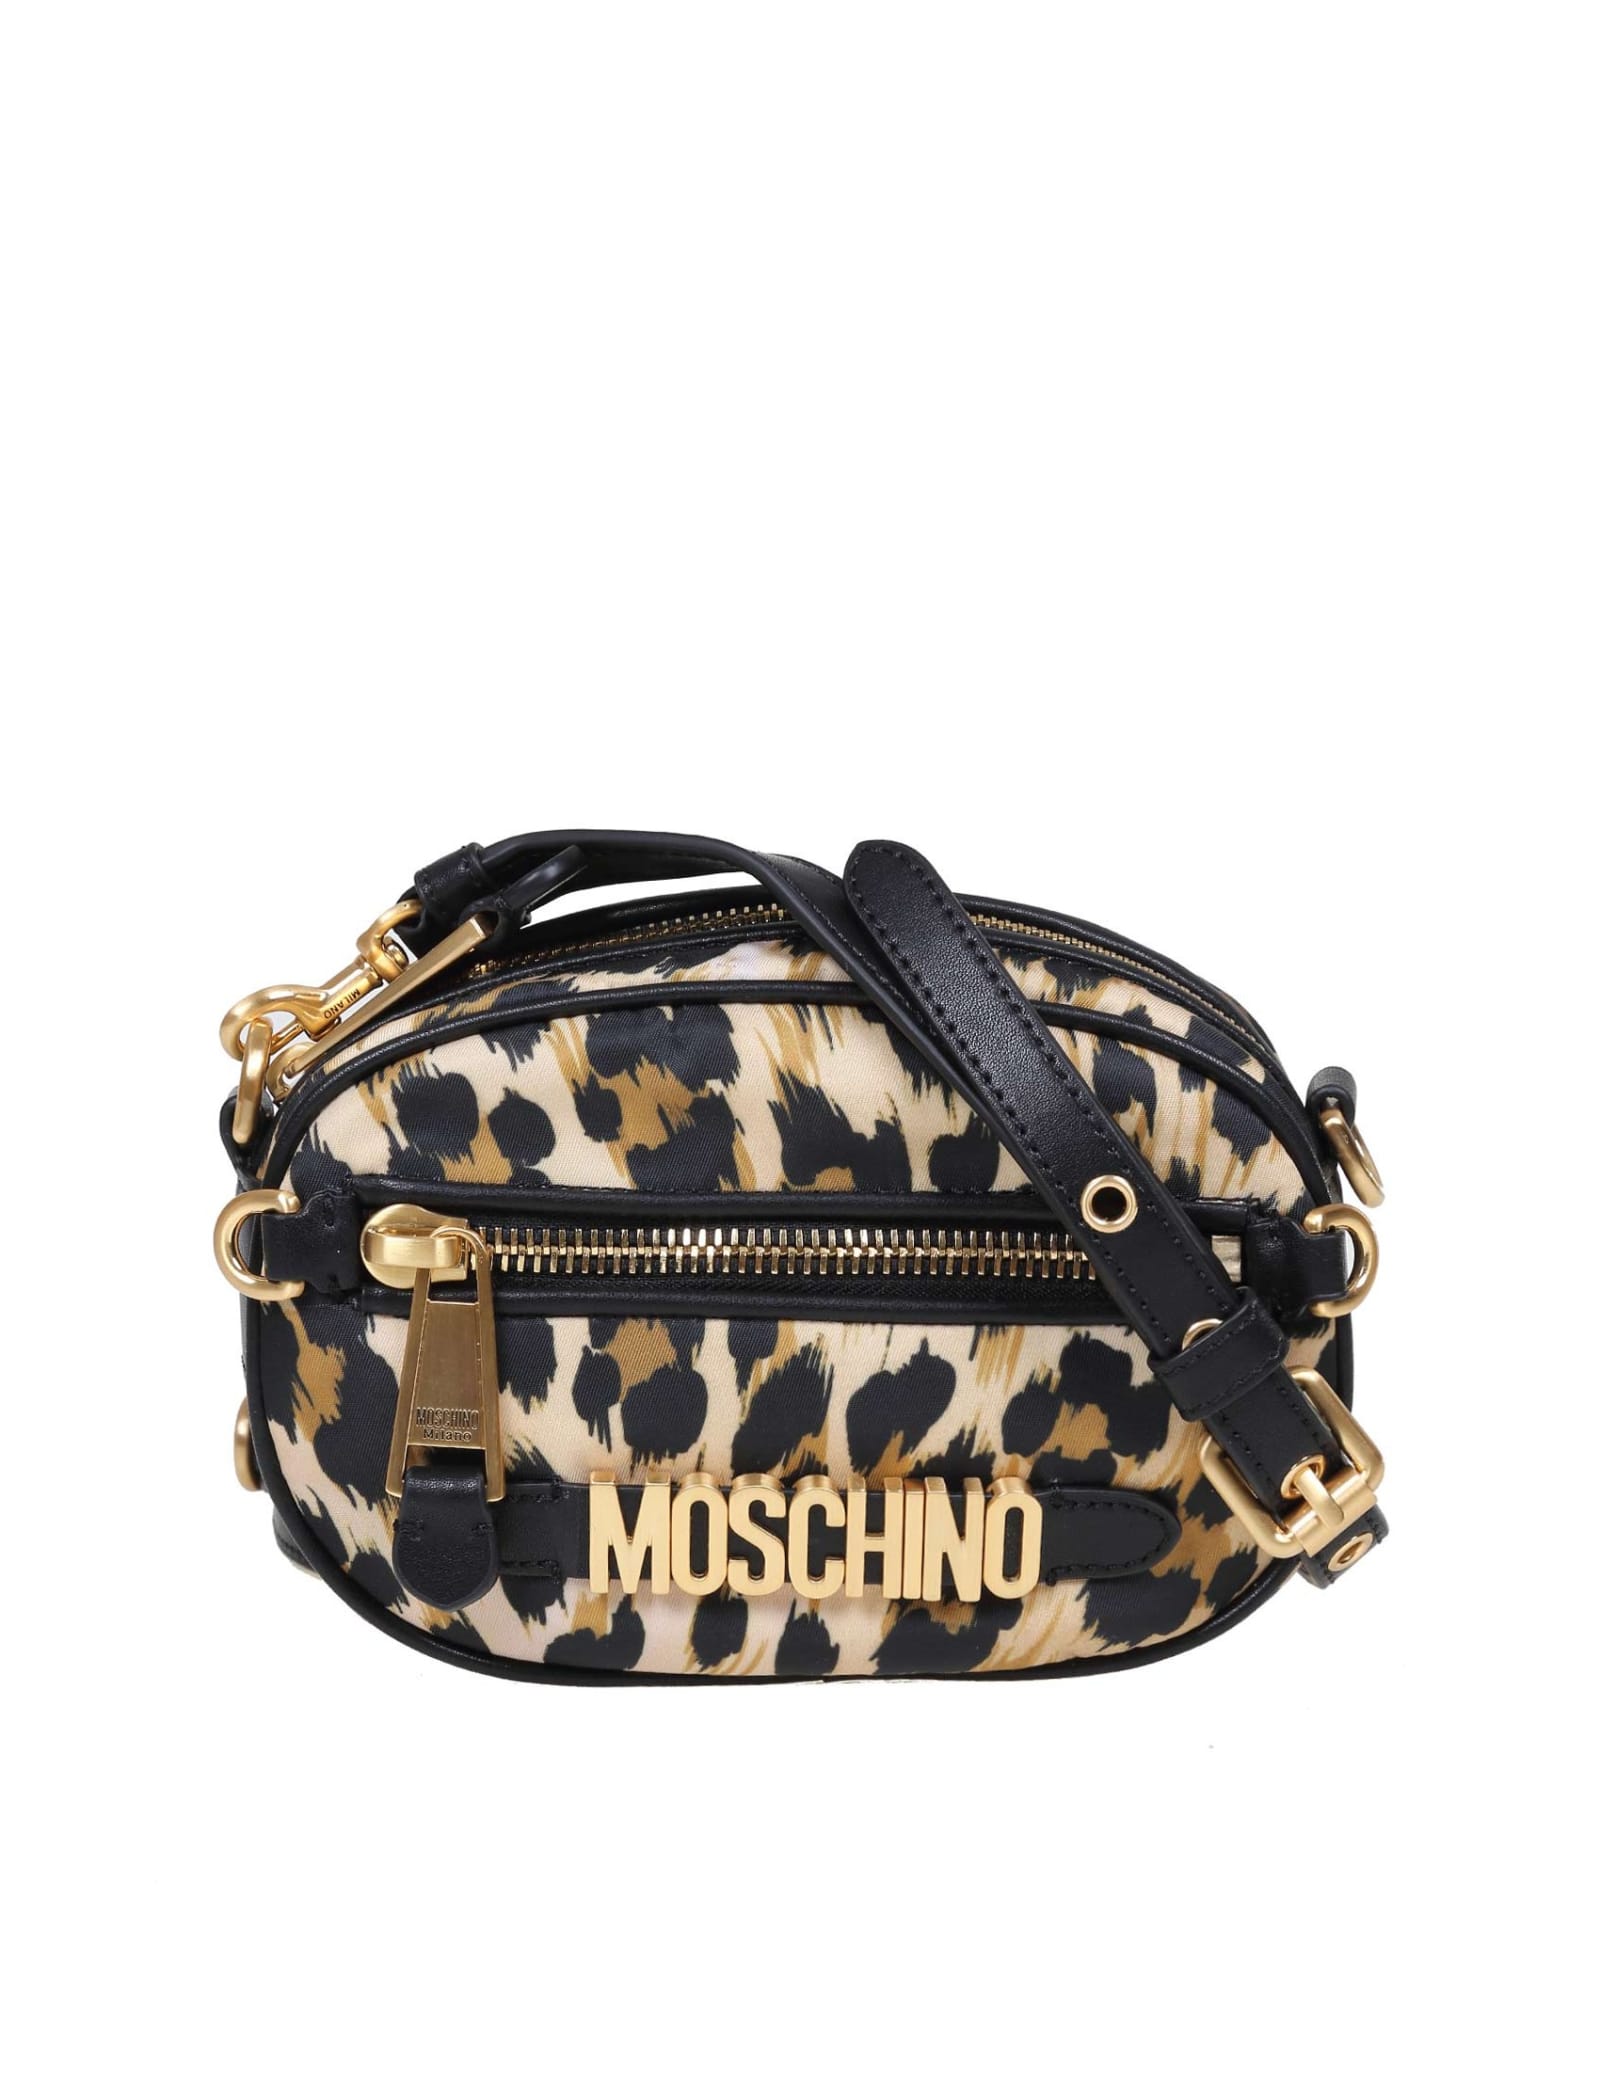 Moschino Shoulder Bag In Nylon With Leopard Print